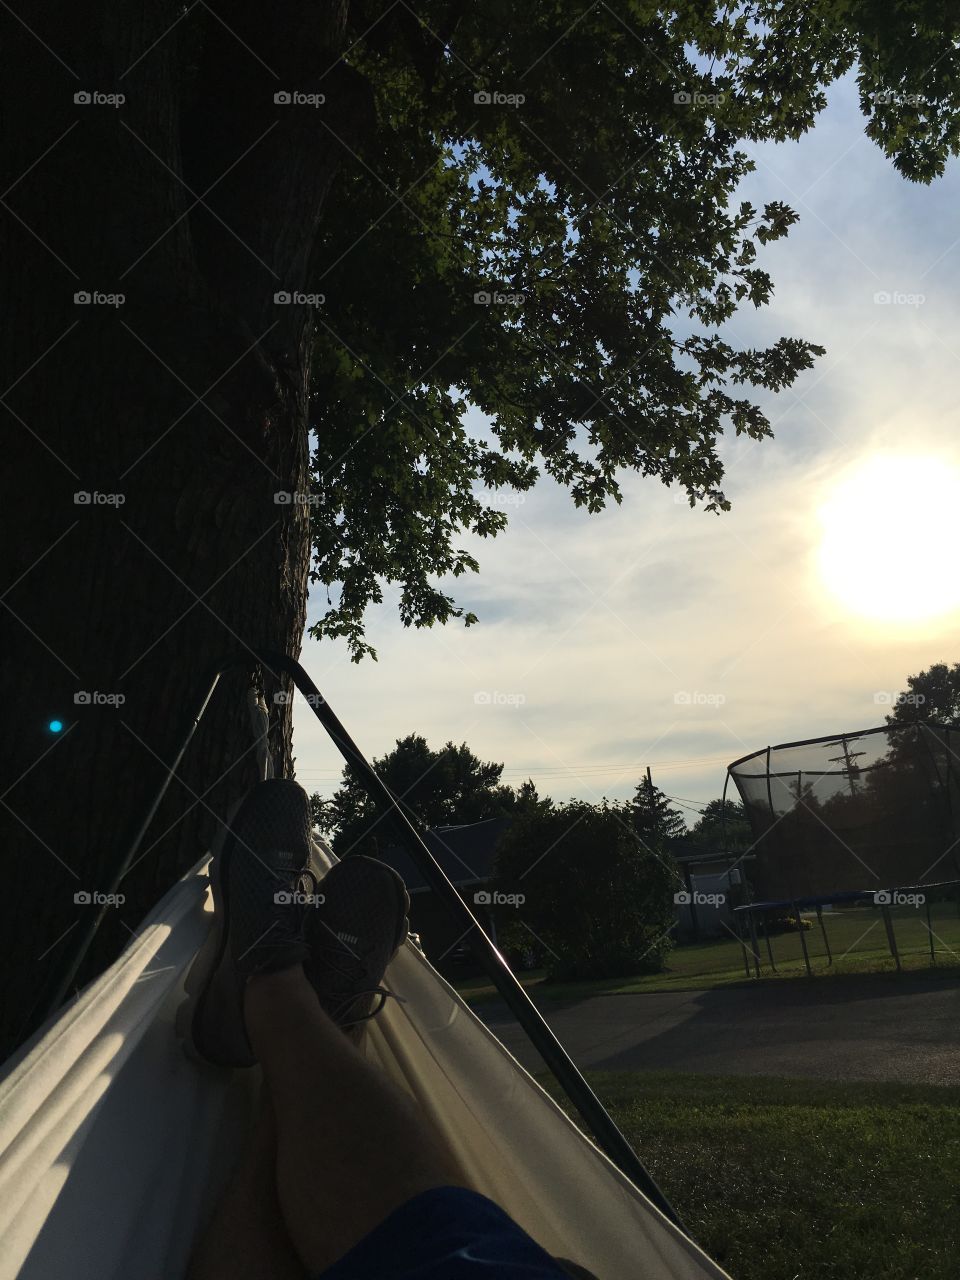 Relaxing in a hammock while the sun sets on a summer evening in Pennsylvania 